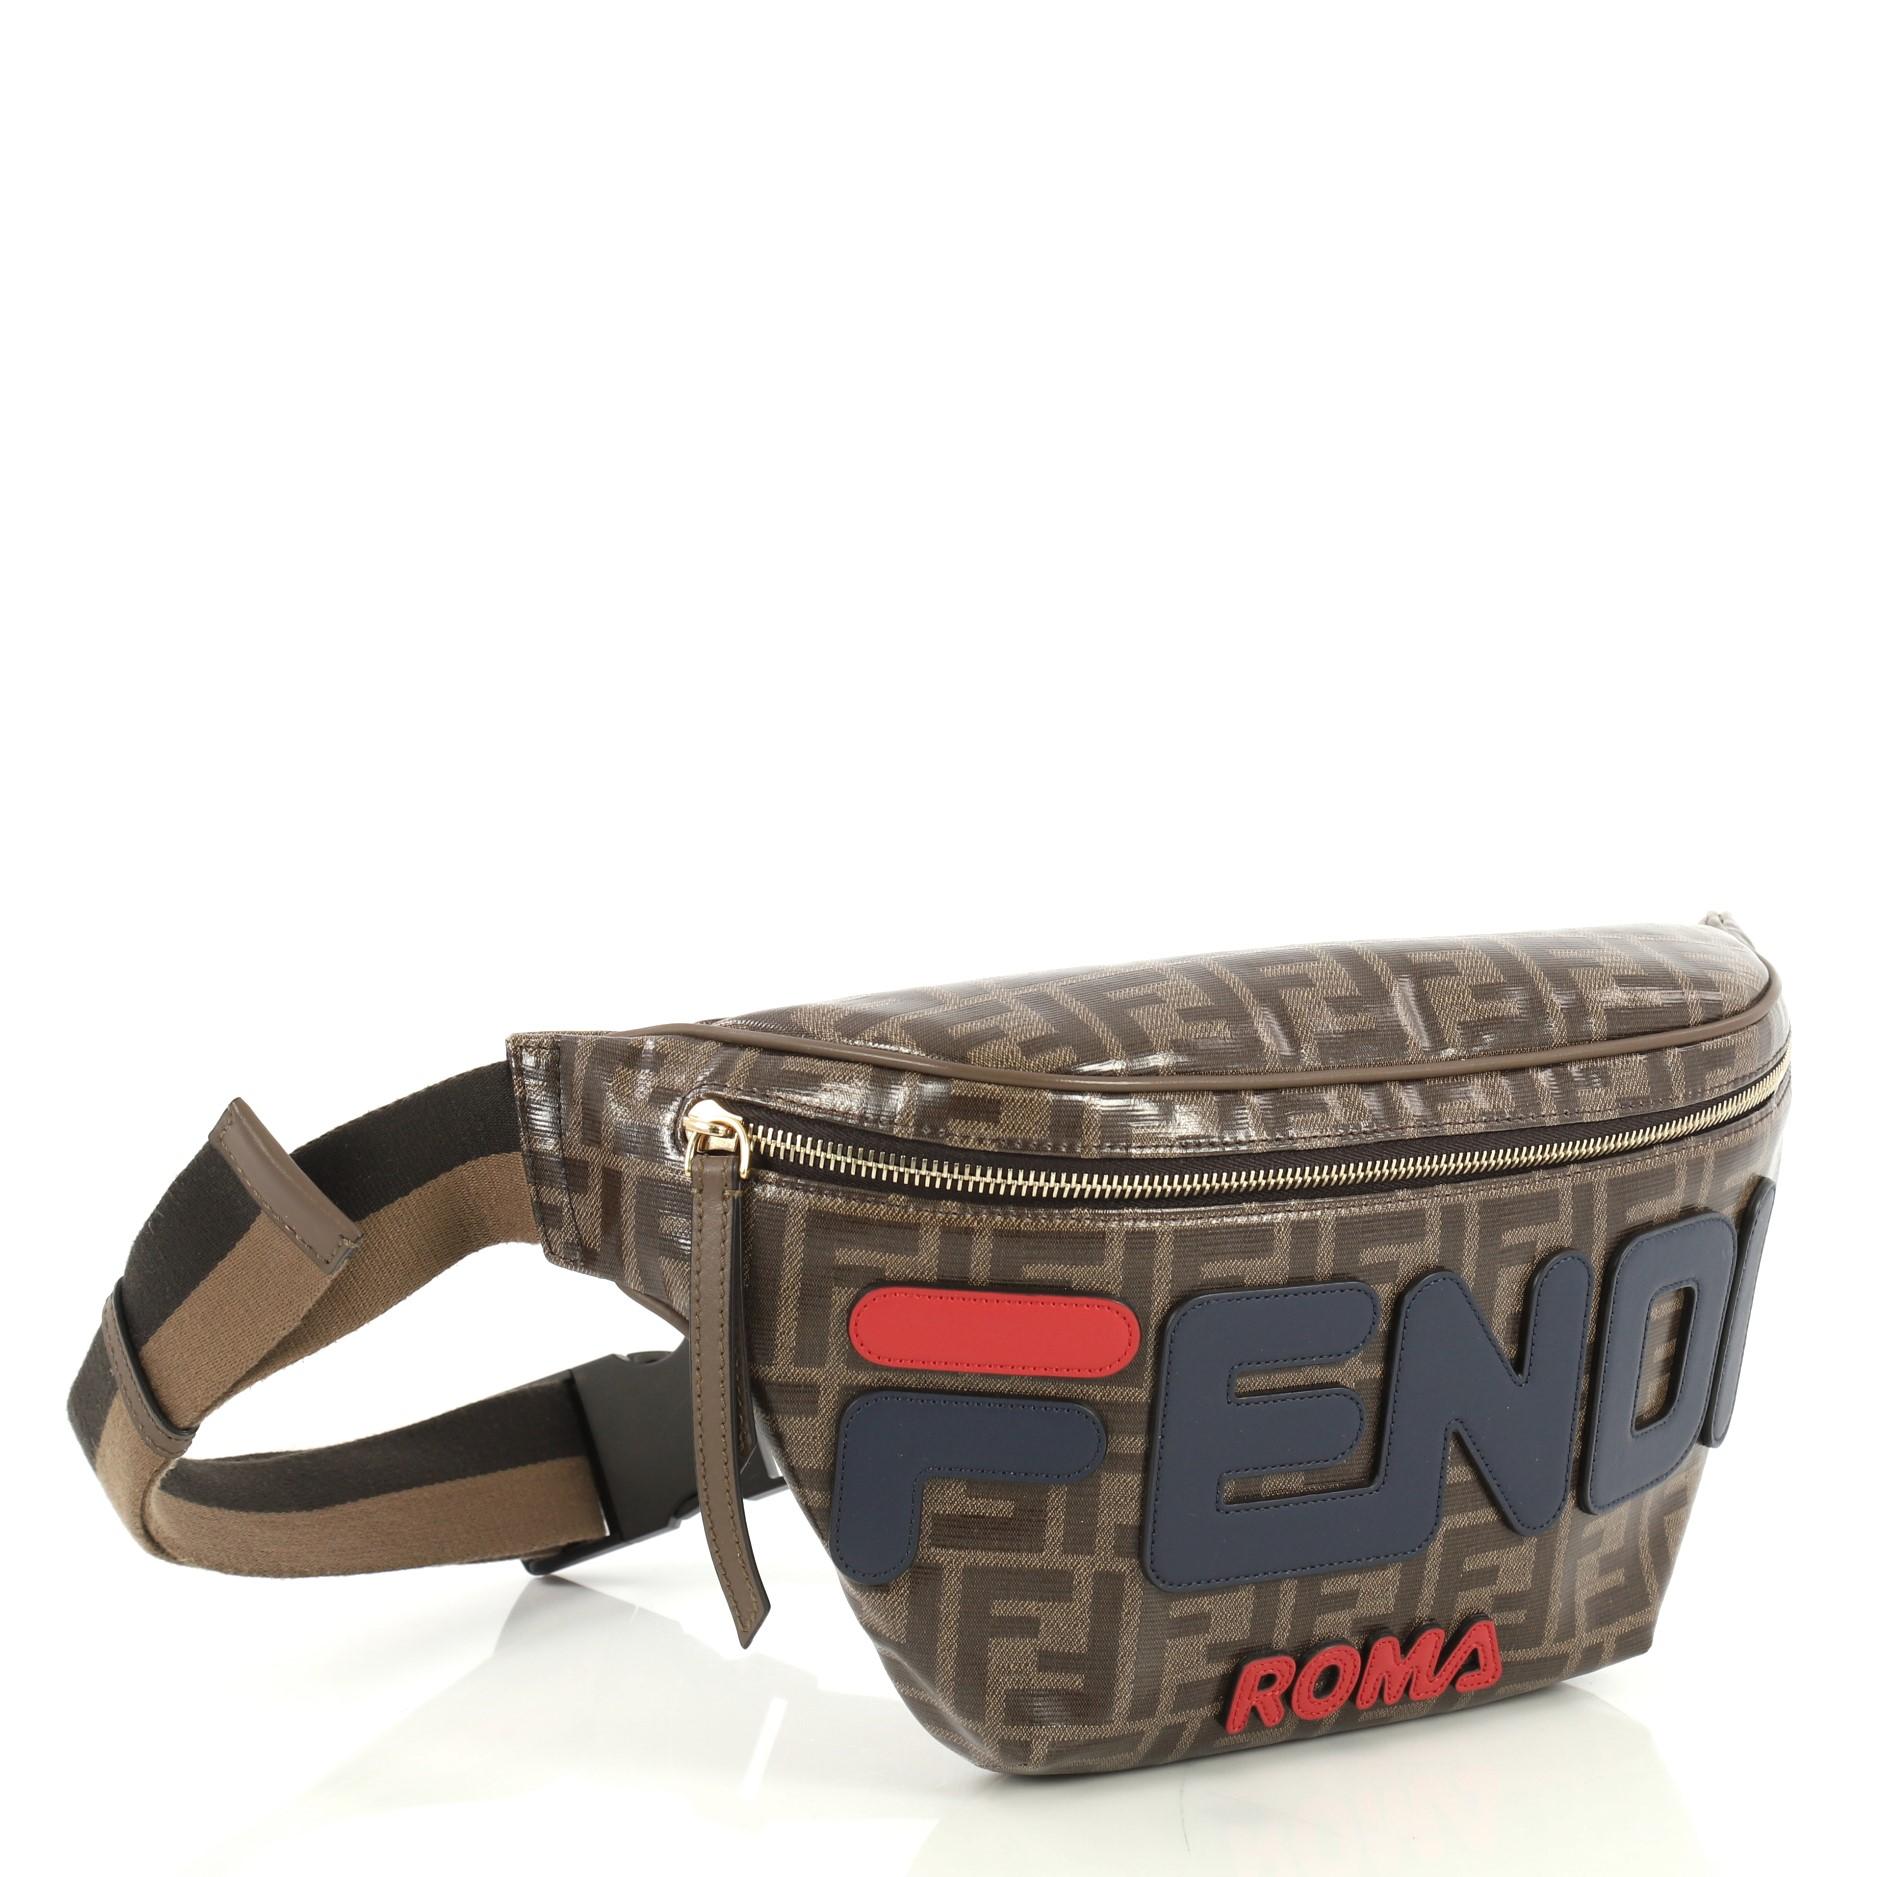 This Fendi Mania Waist Bag Zucca Coated Canvas, crafted from brown zucca coated canvas, features adjustable strap with buckle closure and gold-tone hardware. Its zip closure opens to a brown fabric interior with zip pocket. 

Estimated Retail Price: